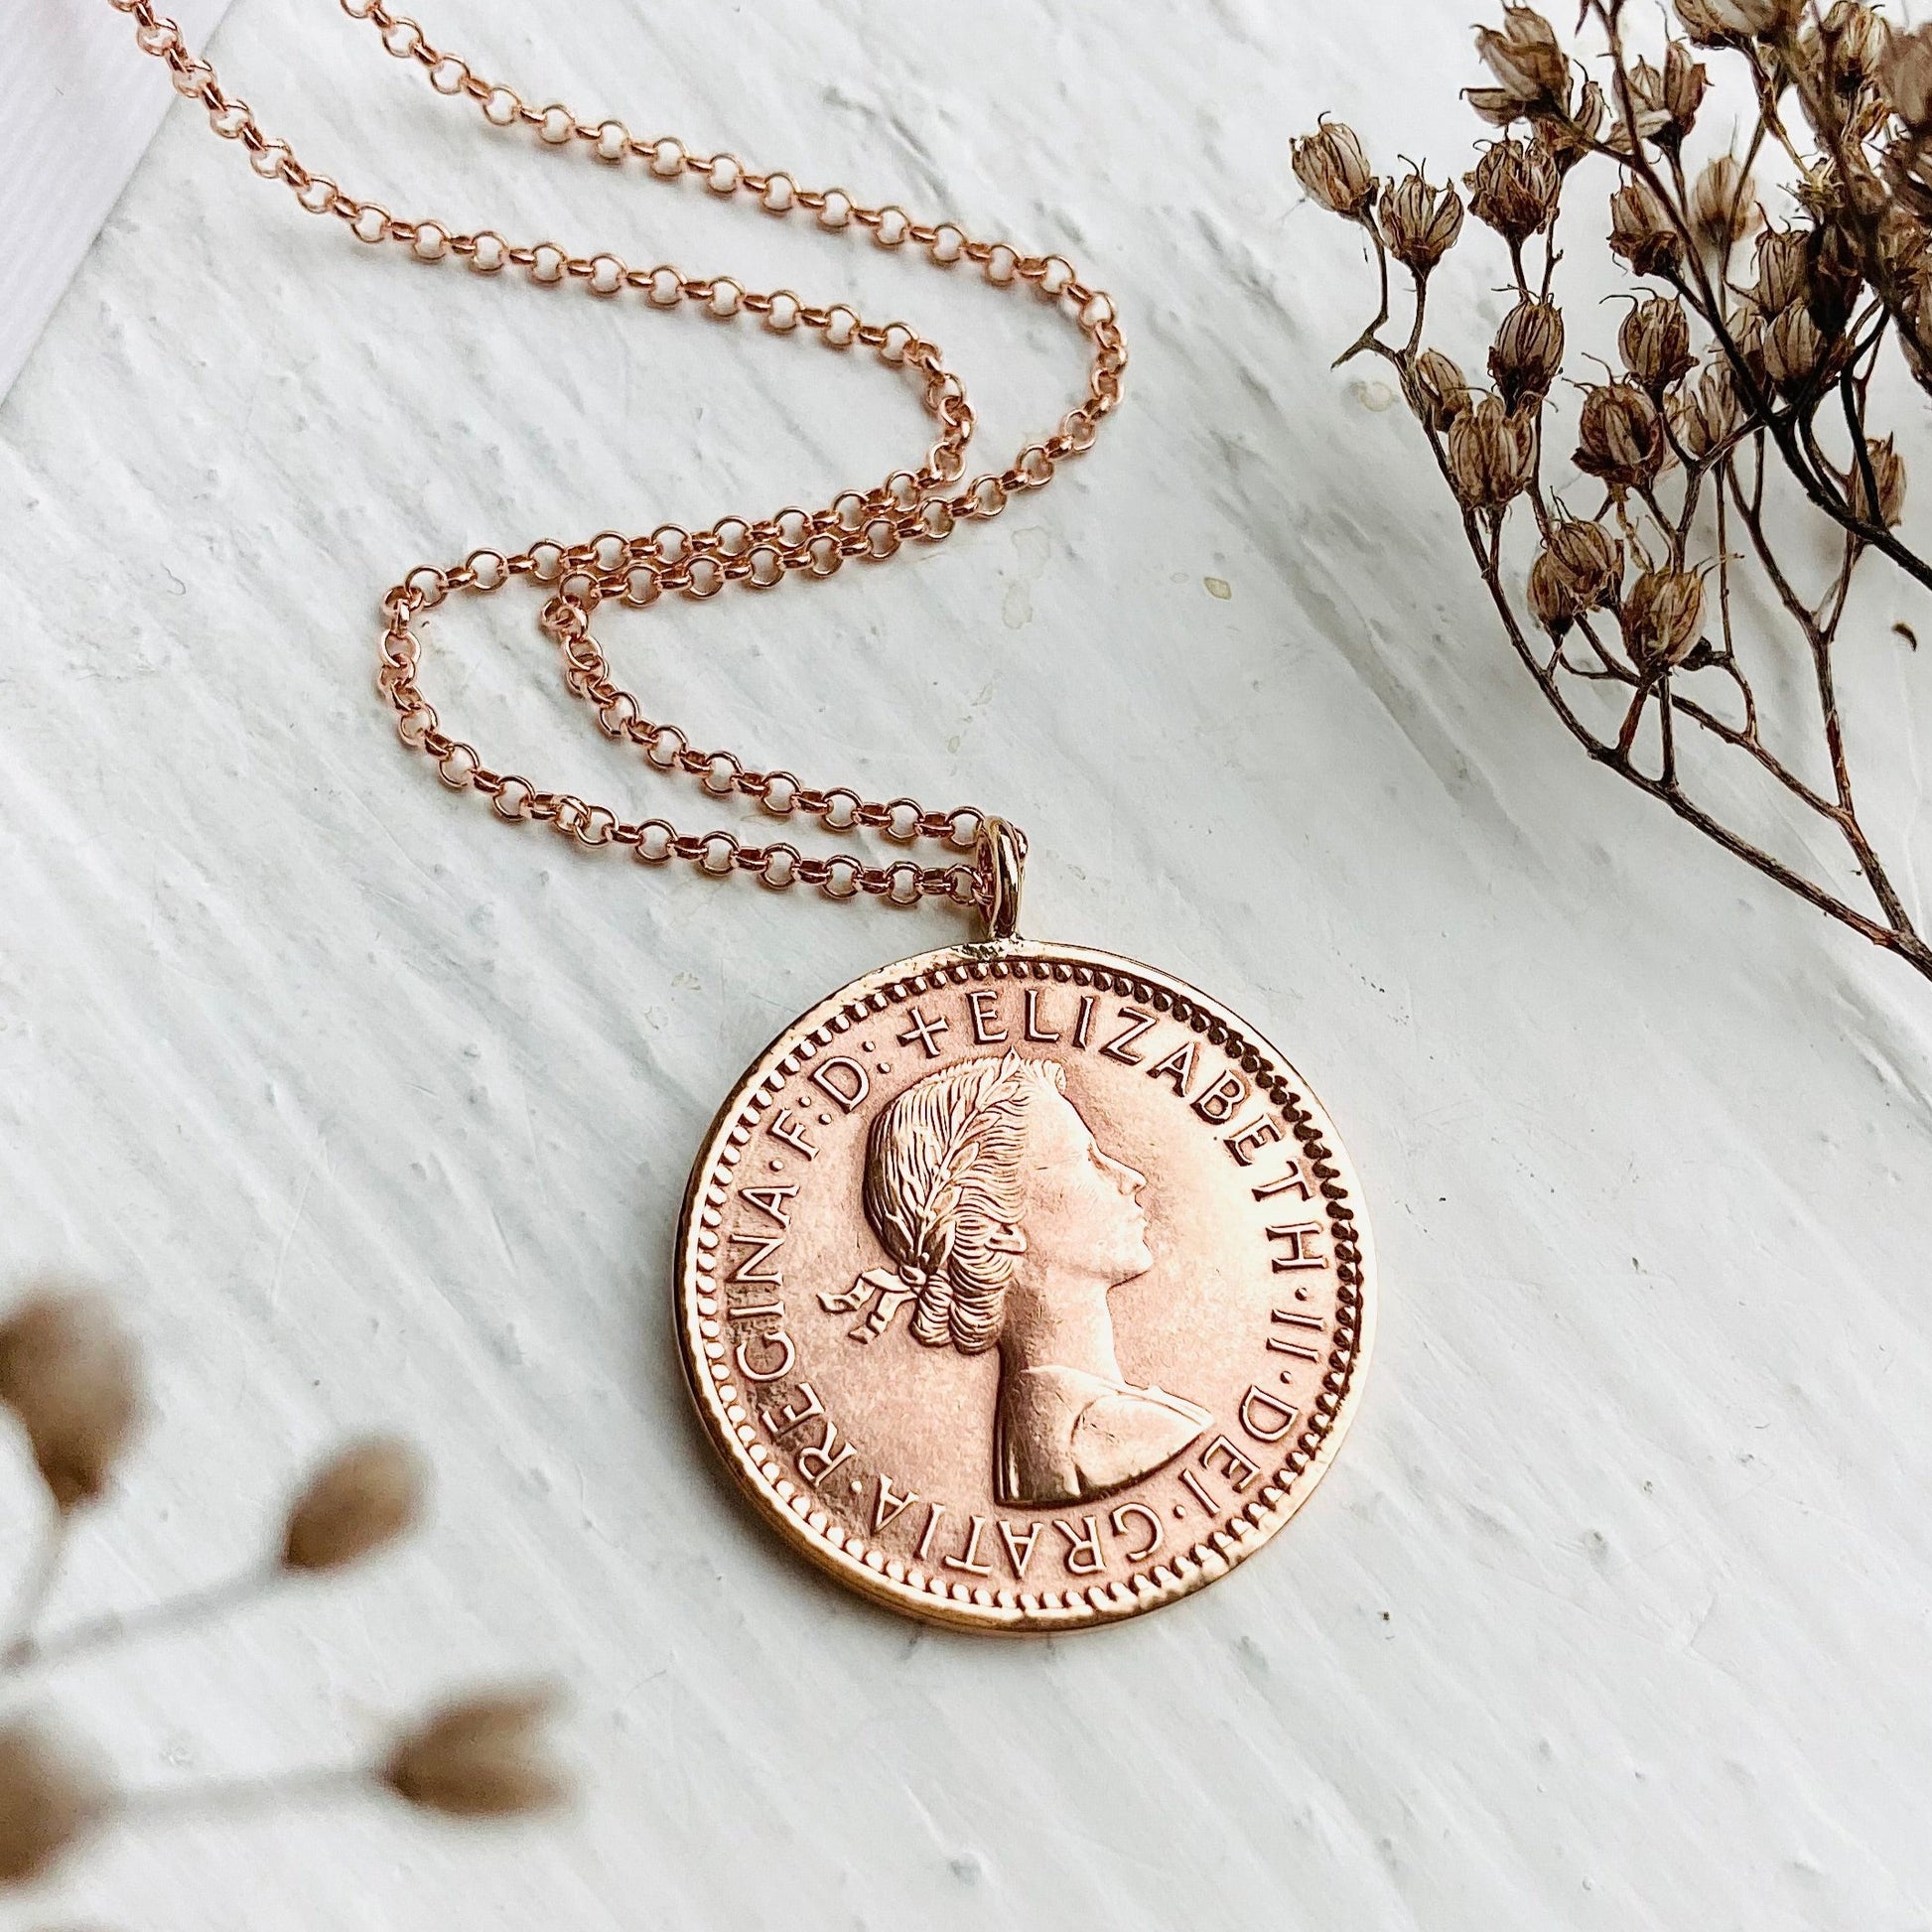 Buy 70th gifts for women, coin pendant gifts, rose gold chain, 70th birthday gift or 70th anniversary pendant necklace with wren